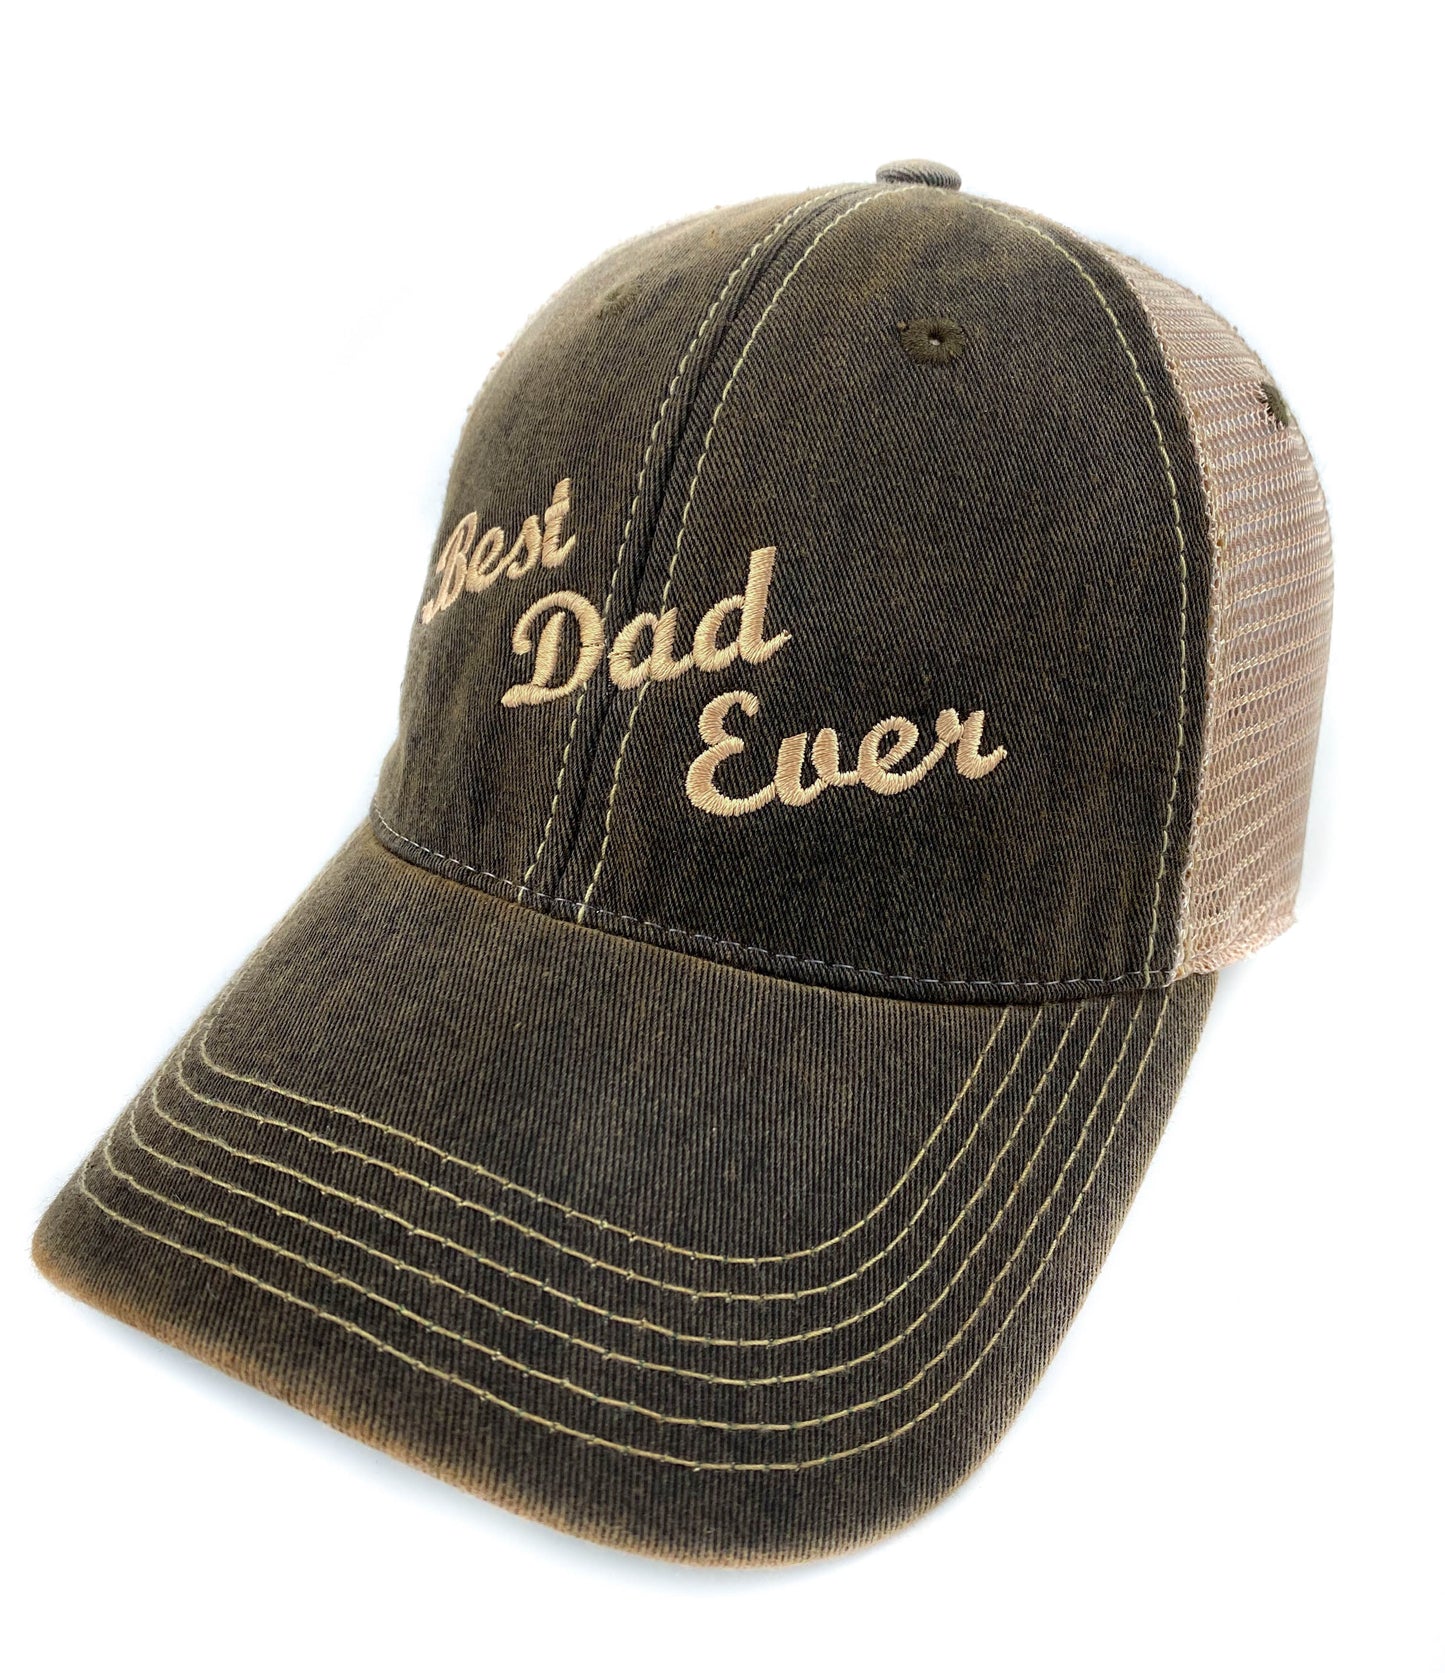 Best Dad Ever Gift Hat For Father's Day